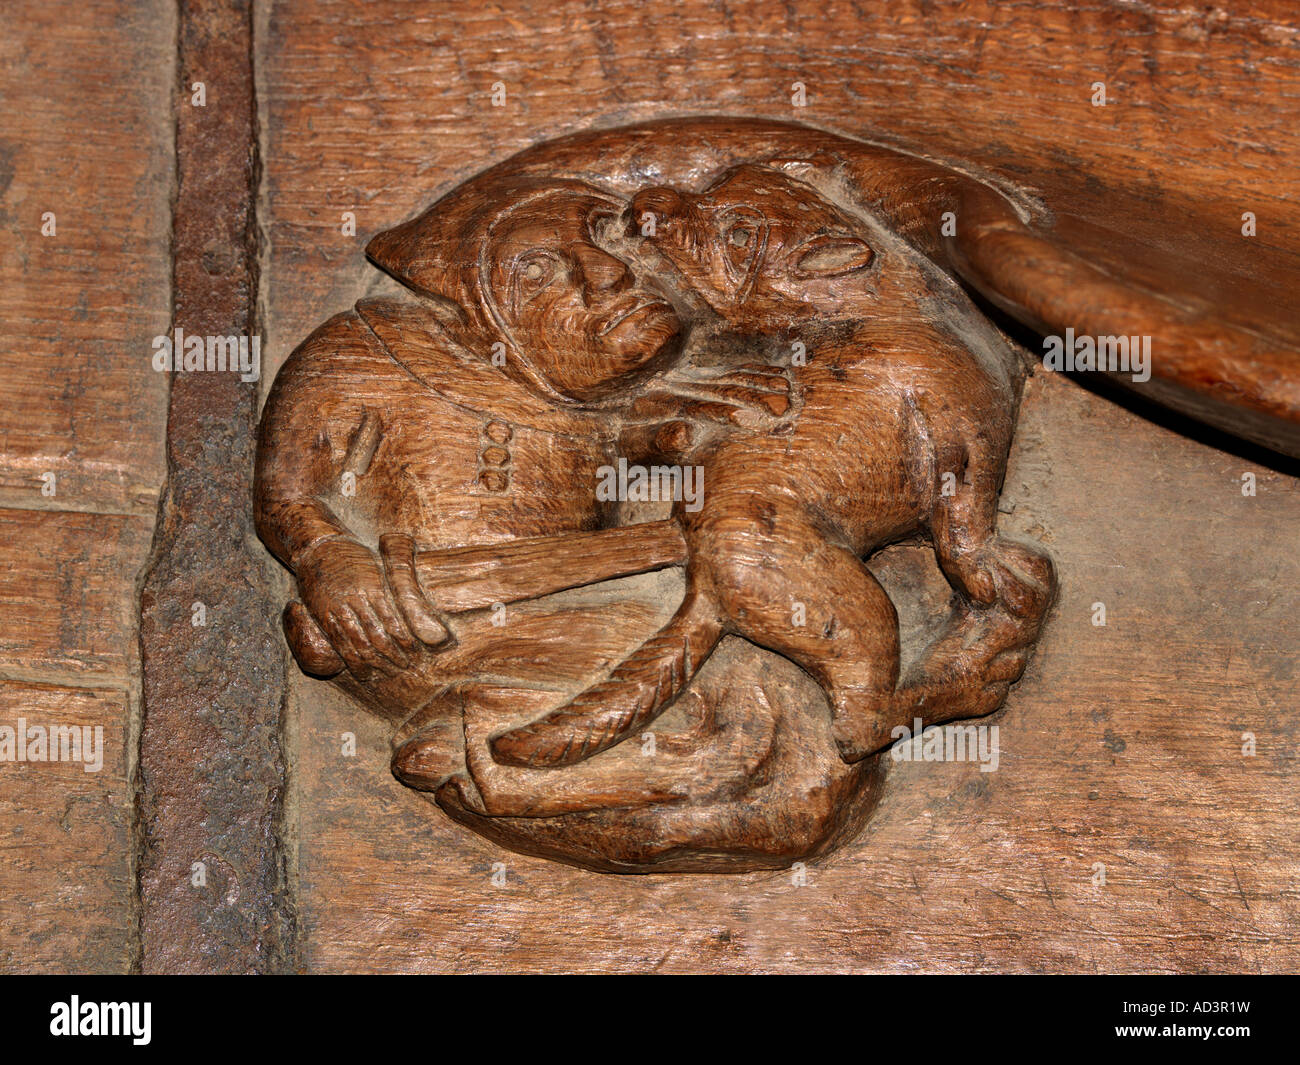 Winchester Hampshire Winchester Cathedral Misericord of a Man Fghting a Wild Animal in the Quire Stock Photo